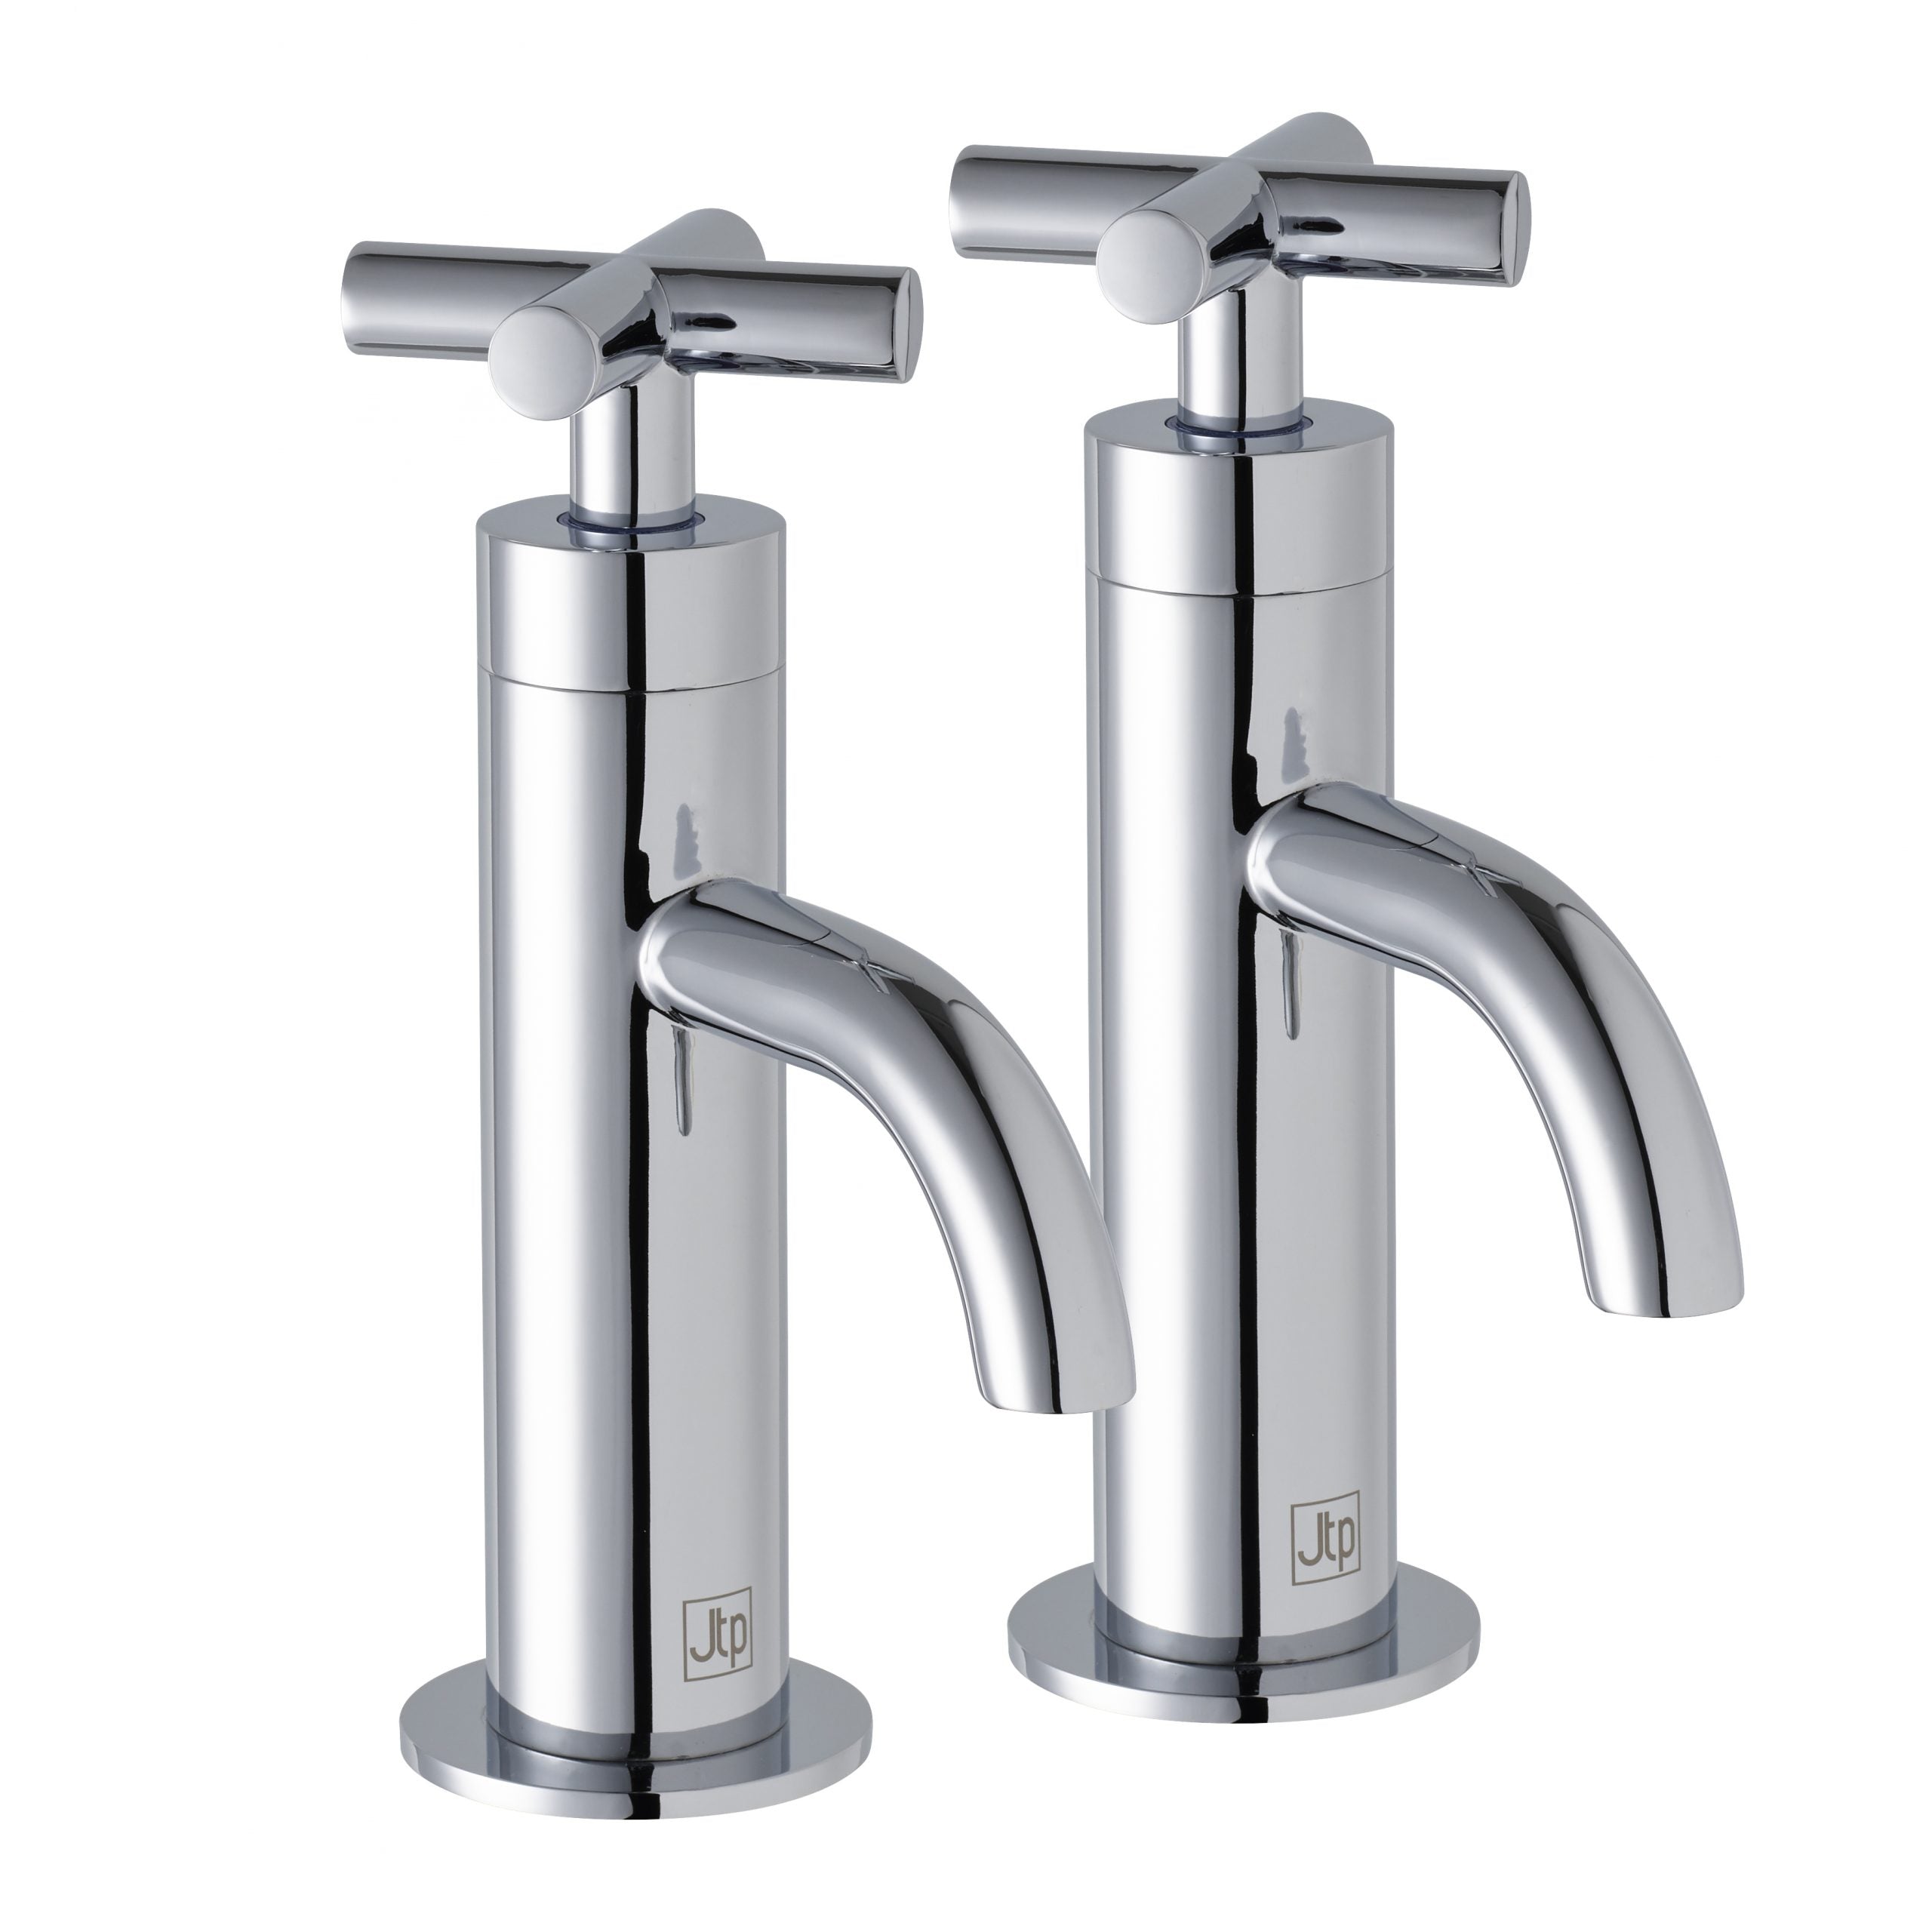 Solex Contemporary Wash Basin Pillar Tap with Precise Responsive Controls, Made from solid brass and finished in Chrome making it Rust-resistant and Easy to Clean, MP 0.2 [66011]